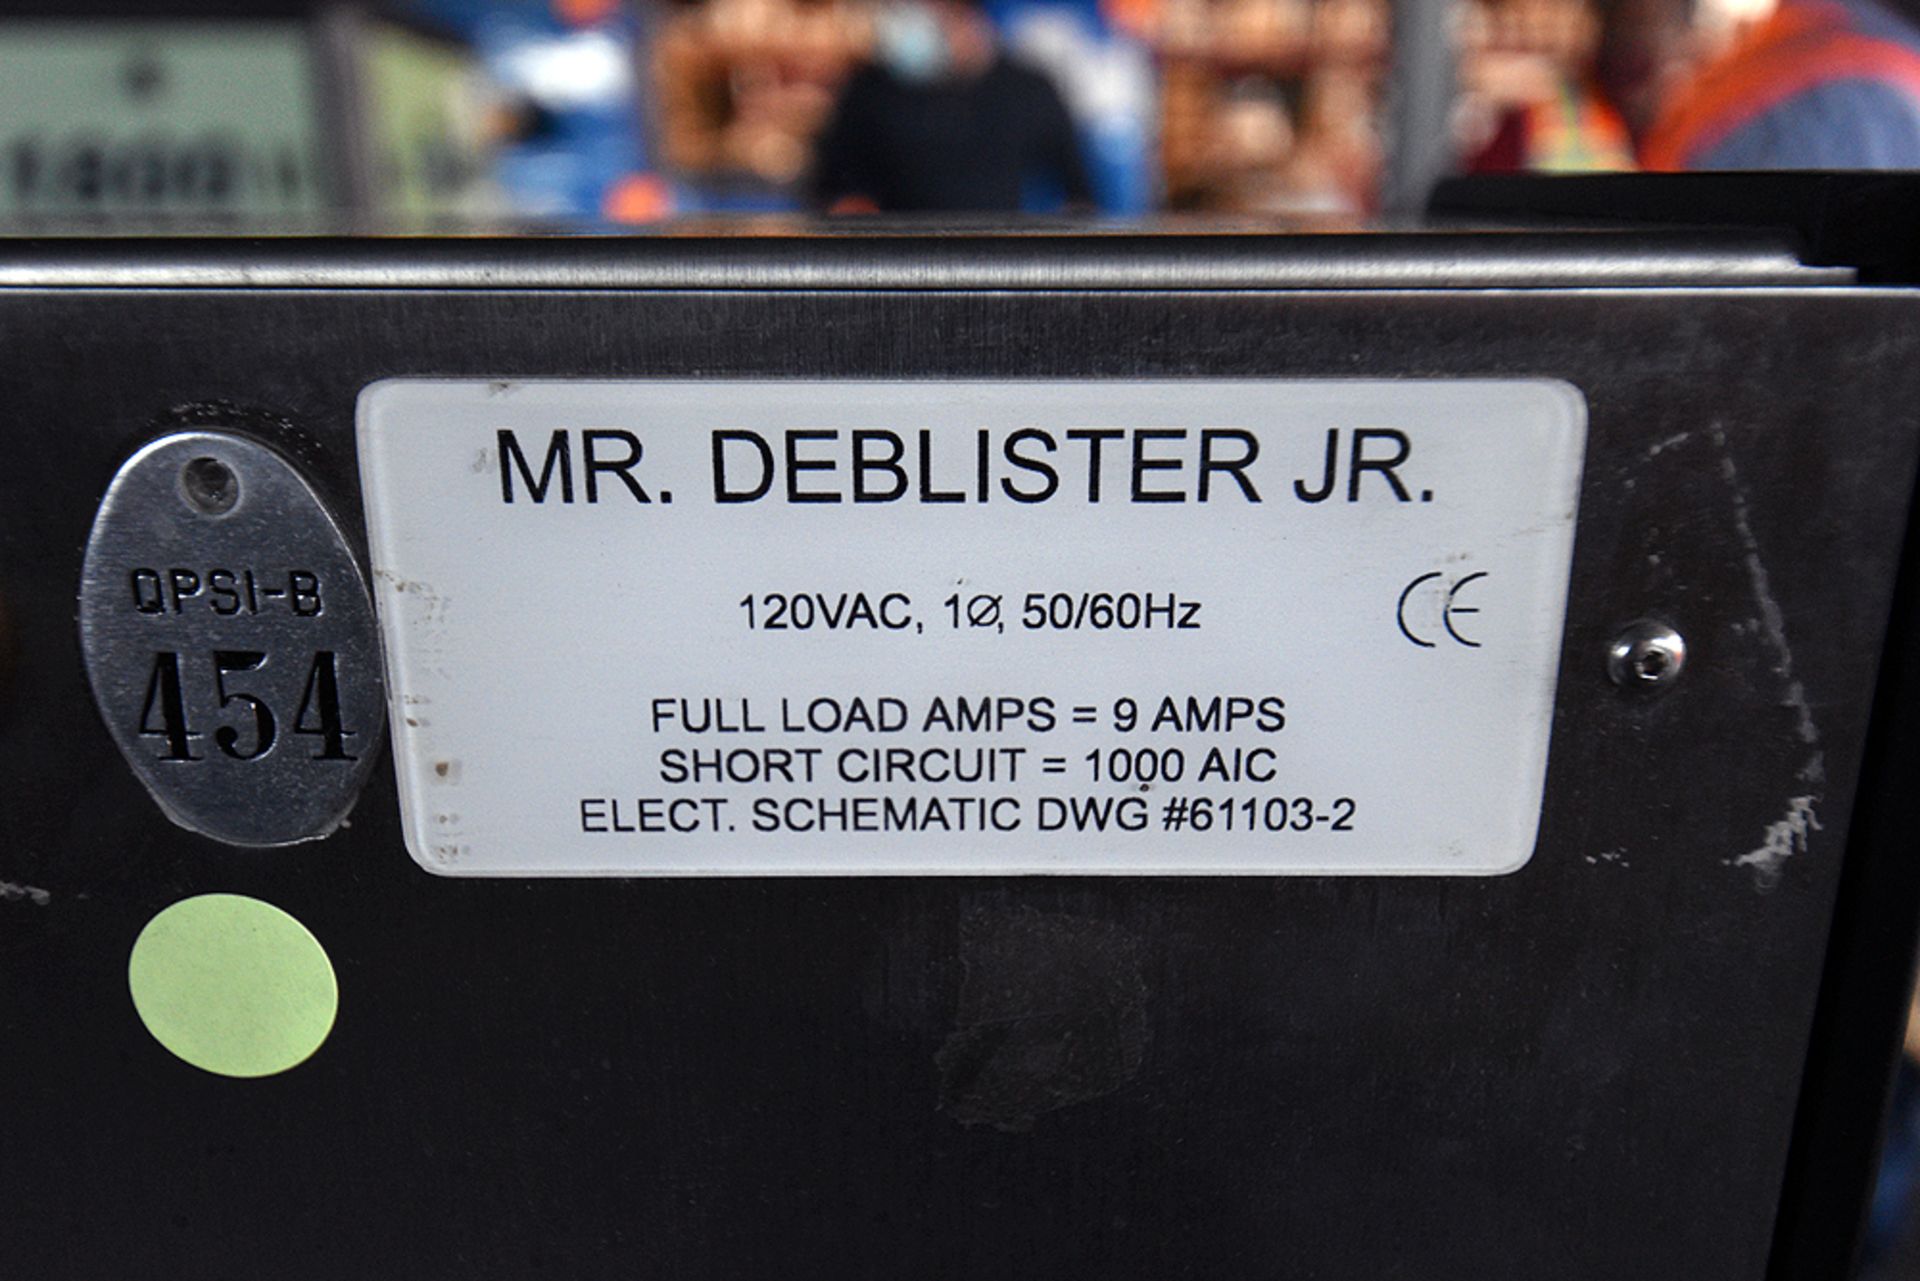 Gemel Precision "Mr. Deblister Jr." Product Recovery System - Image 8 of 10